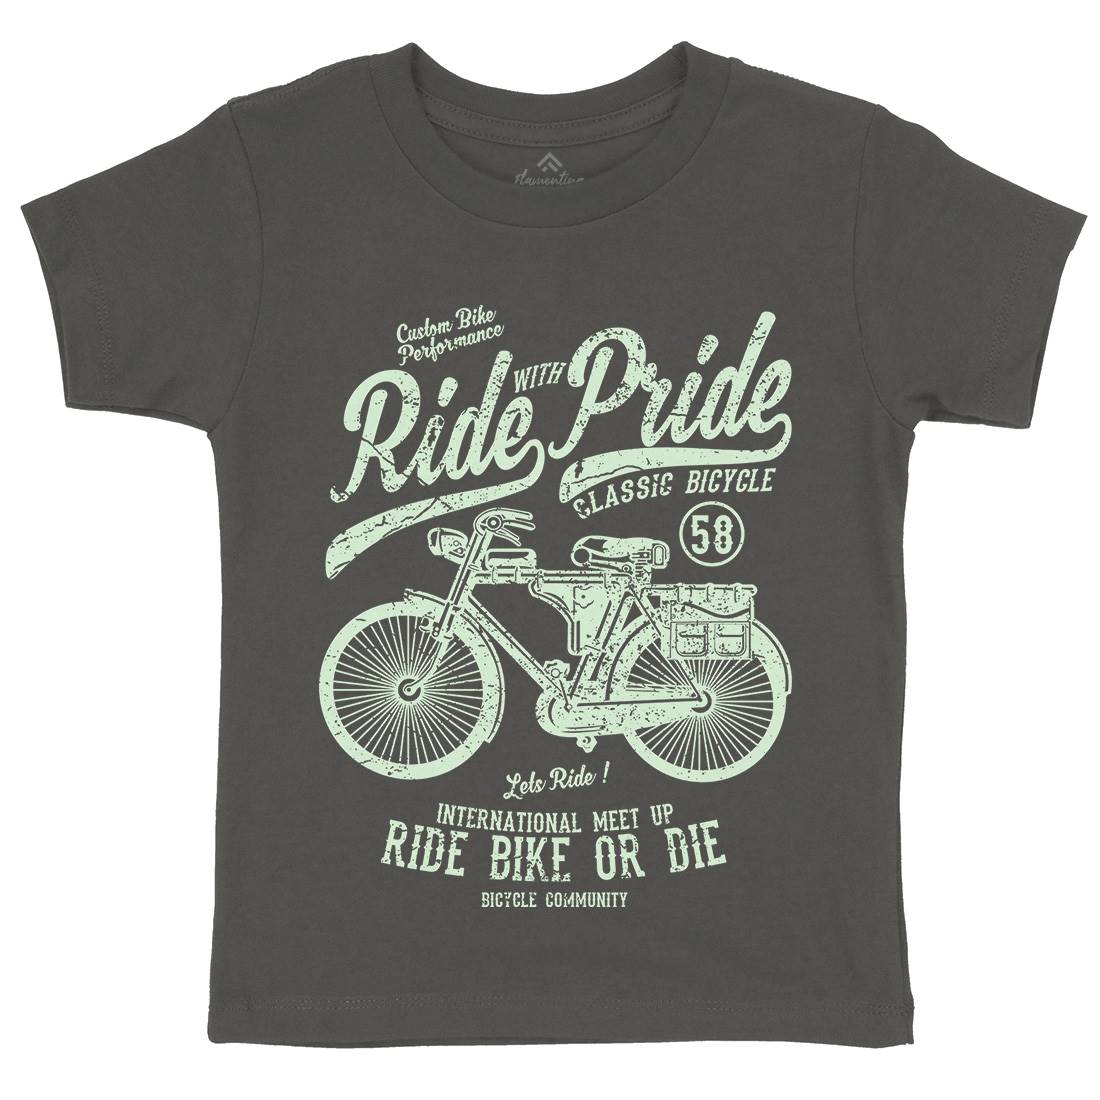 Ride With Pride Kids Crew Neck T-Shirt Bikes A121